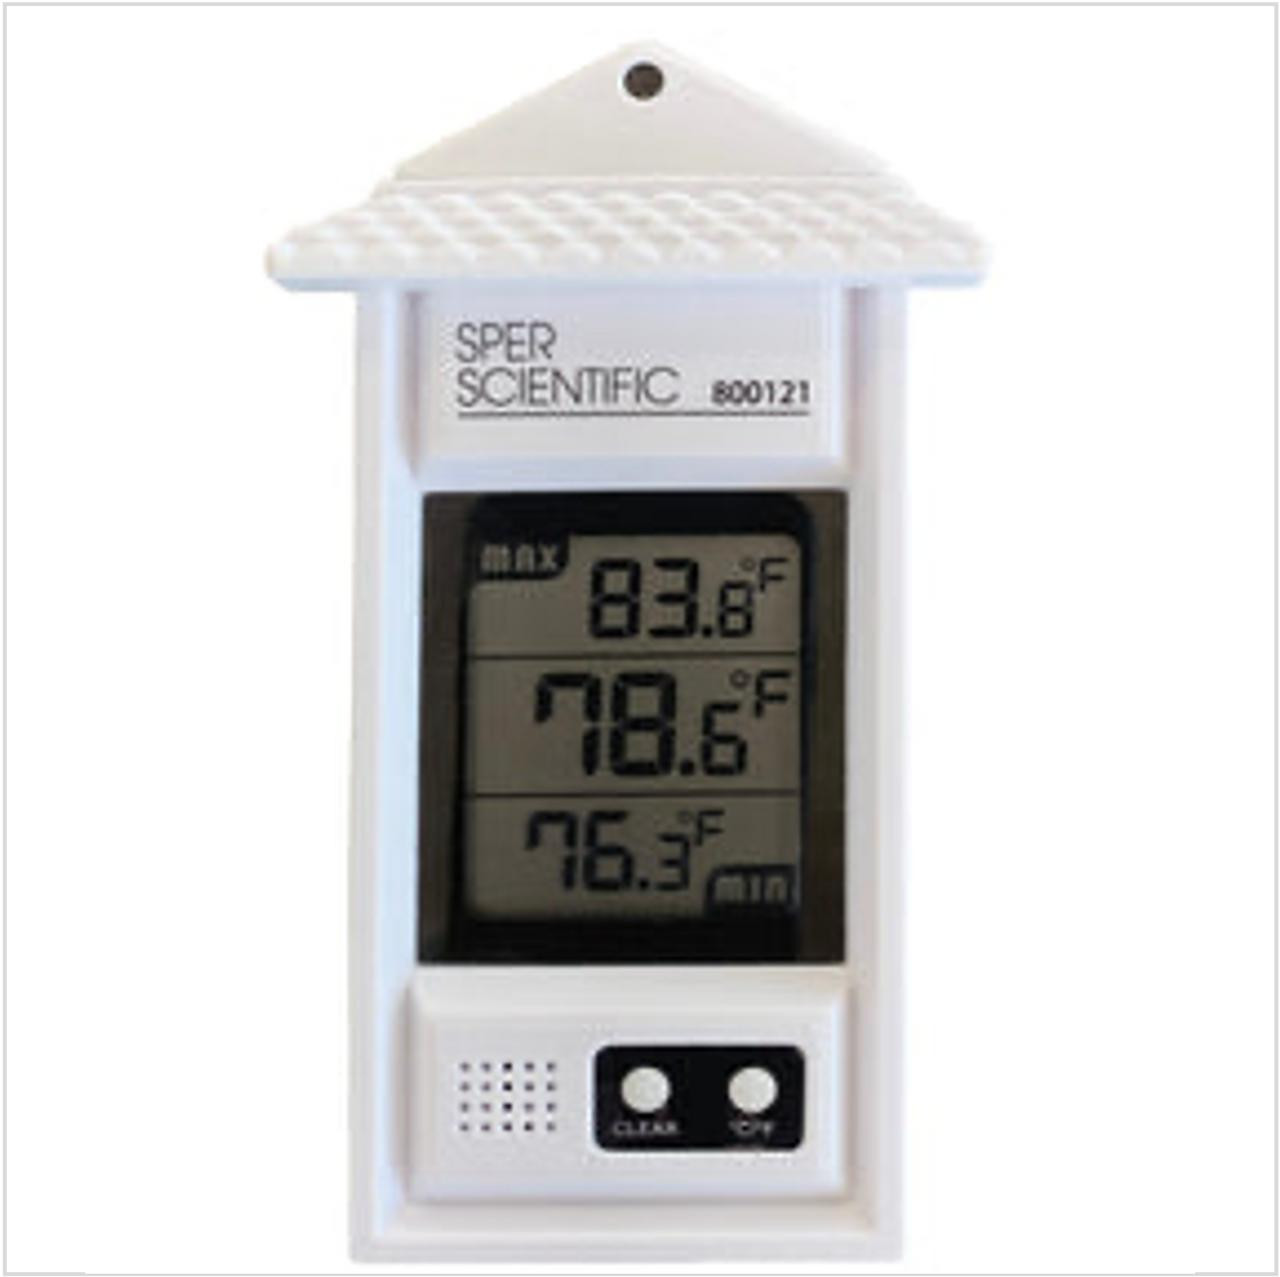 https://cdn11.bigcommerce.com/s-zgzol/images/stencil/1280x1280/products/74999/236067/sper-scientific-sper-800121-min-max-thermometer-with-magnet-nist-certificate-of-calibration__40681.1696193779.jpg?c=2